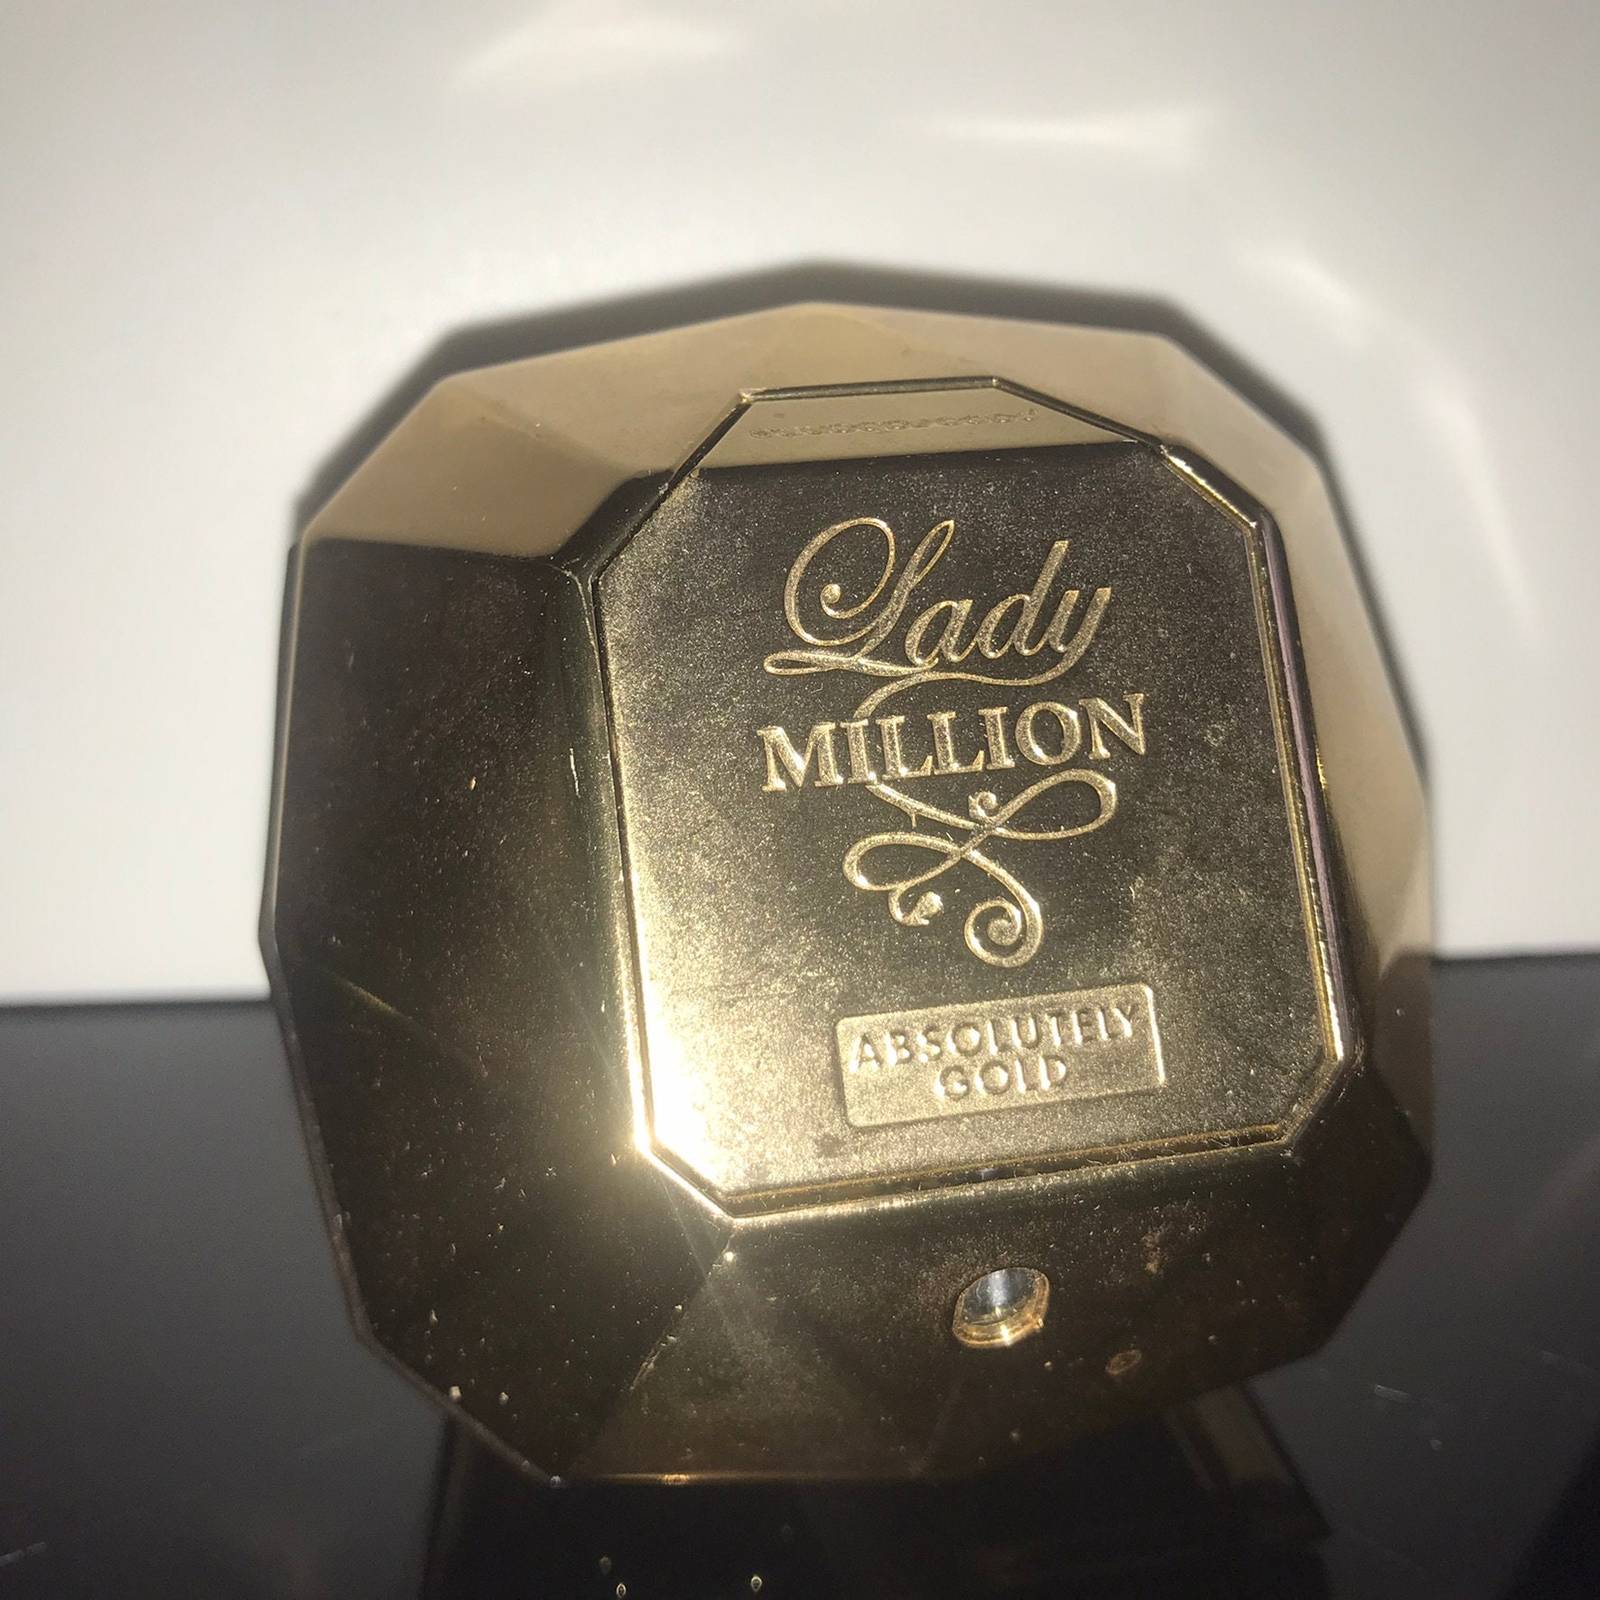 Paco Rabanne Lady Million Absolutely Gold pure perfume for women 80 ml - RAR - m - $189.00